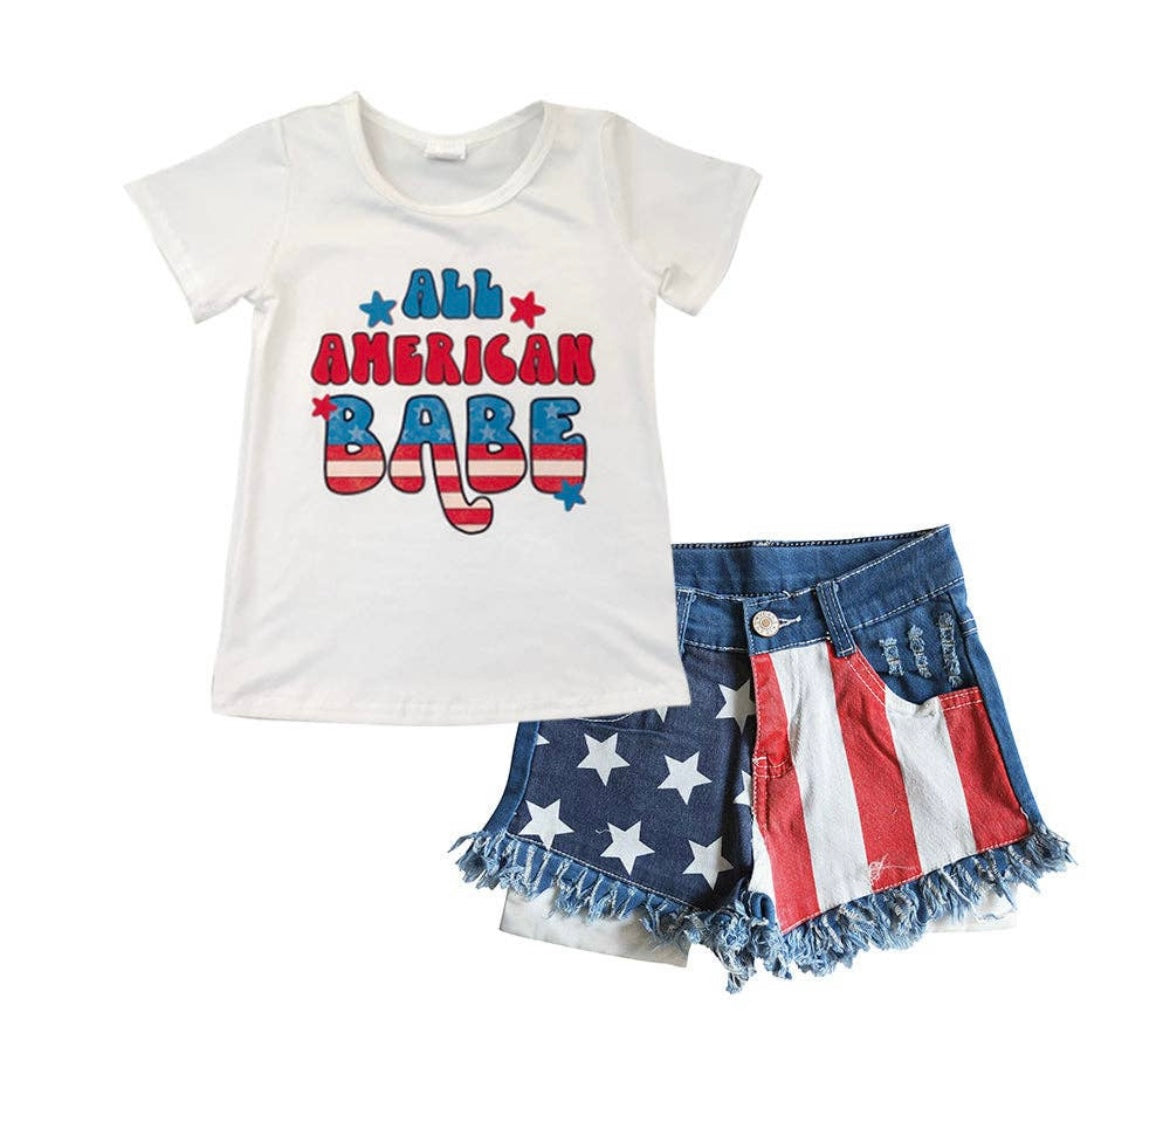 All American Babe T-shirt